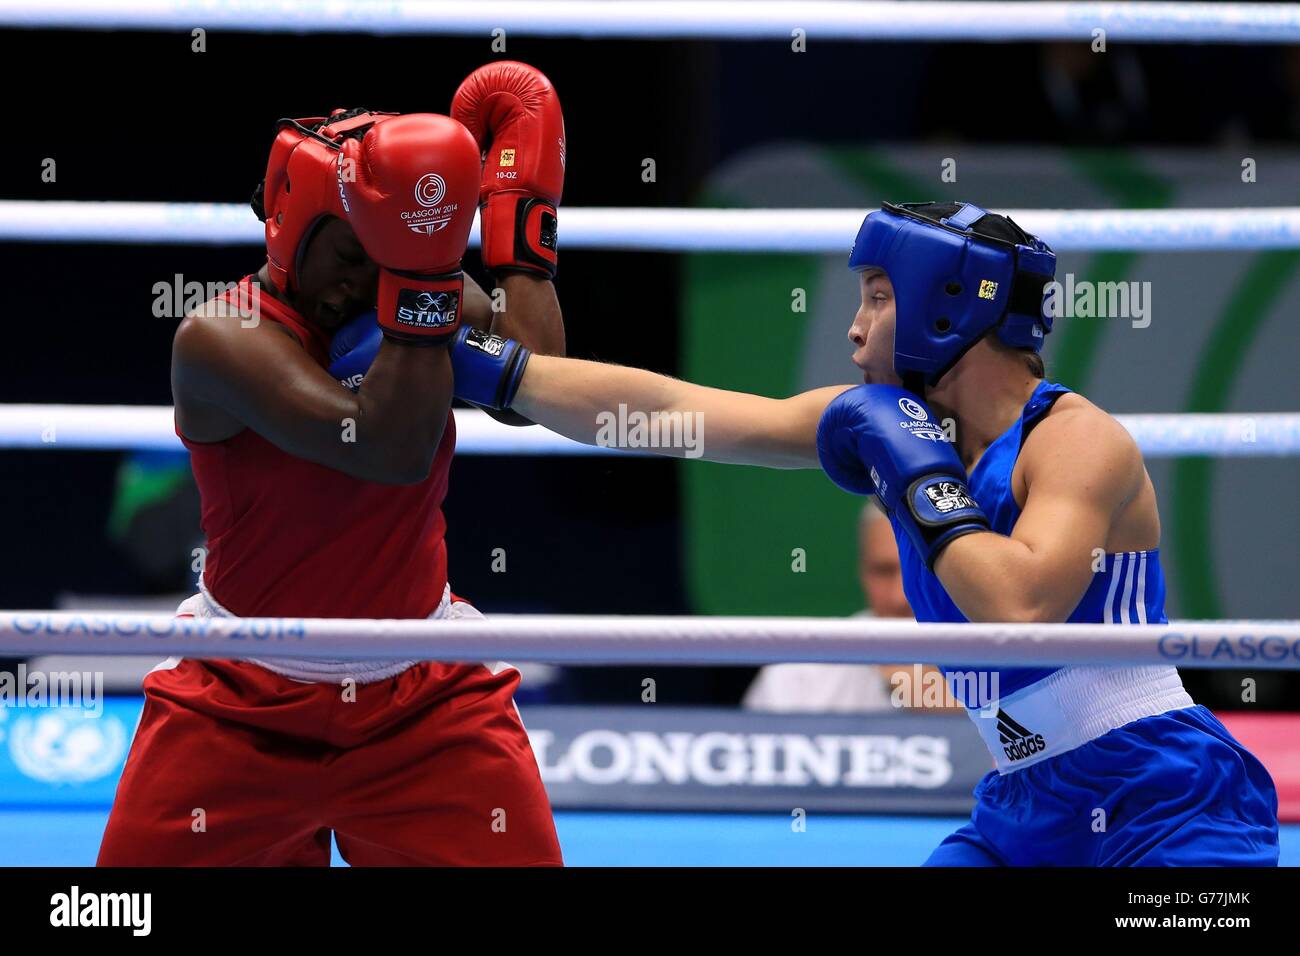 Wales' Lauren Price (right) in action against Guyana's Theresa London in the Women's Middle round of 16 match at the SECC, during the 2014 Commonwealth Games in Glasgow. Stock Photo